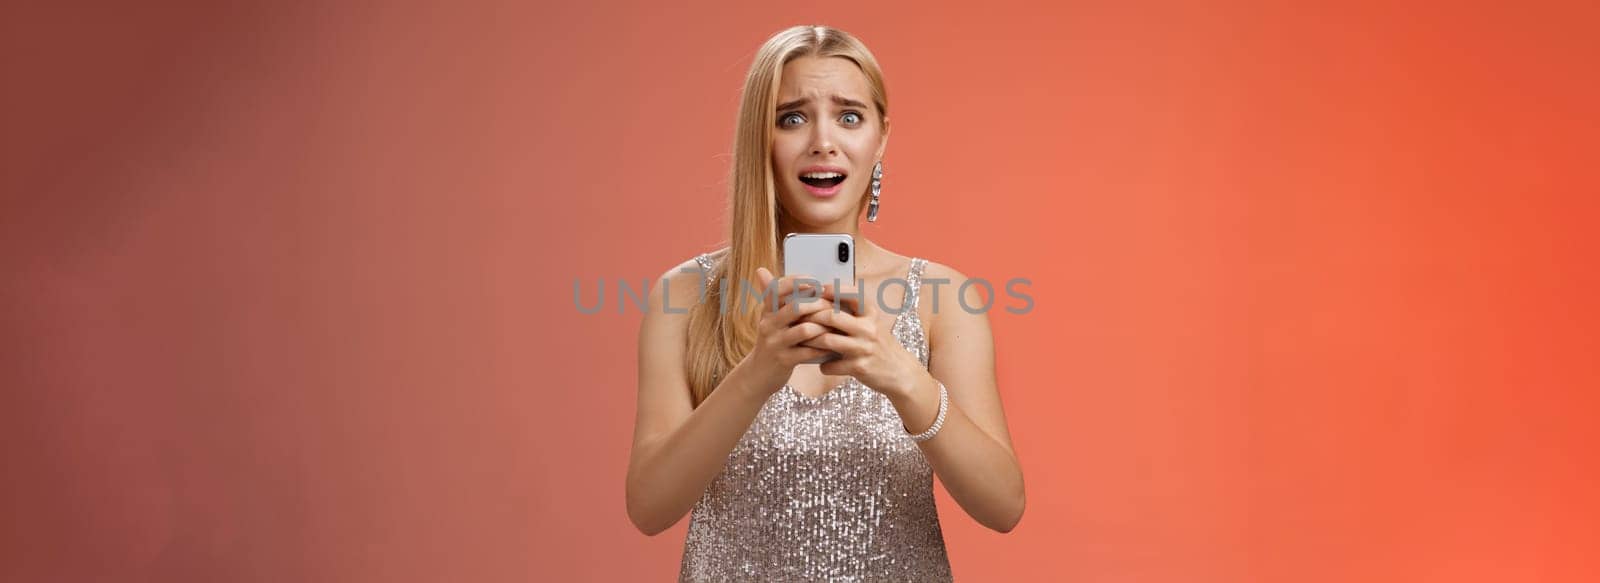 Panicking shocked woman concerned photos leaked internet look afraid anxious widen eyes cringing troubled hold smartphone shook speechless gasping terrified friends find out secret, red background by Benzoix